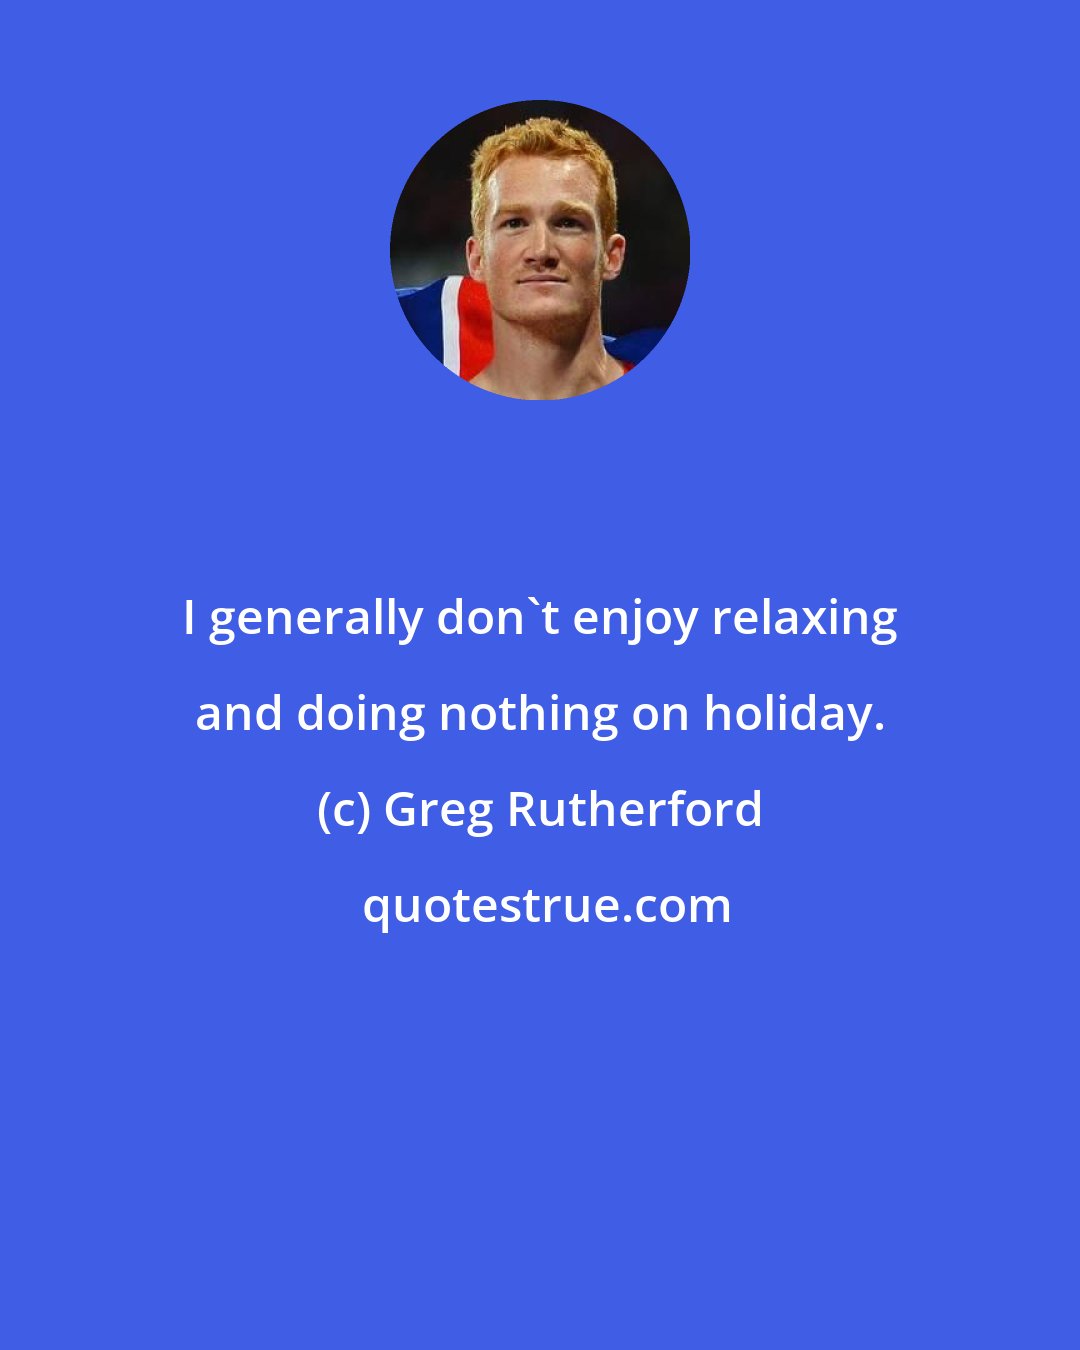 Greg Rutherford: I generally don't enjoy relaxing and doing nothing on holiday.